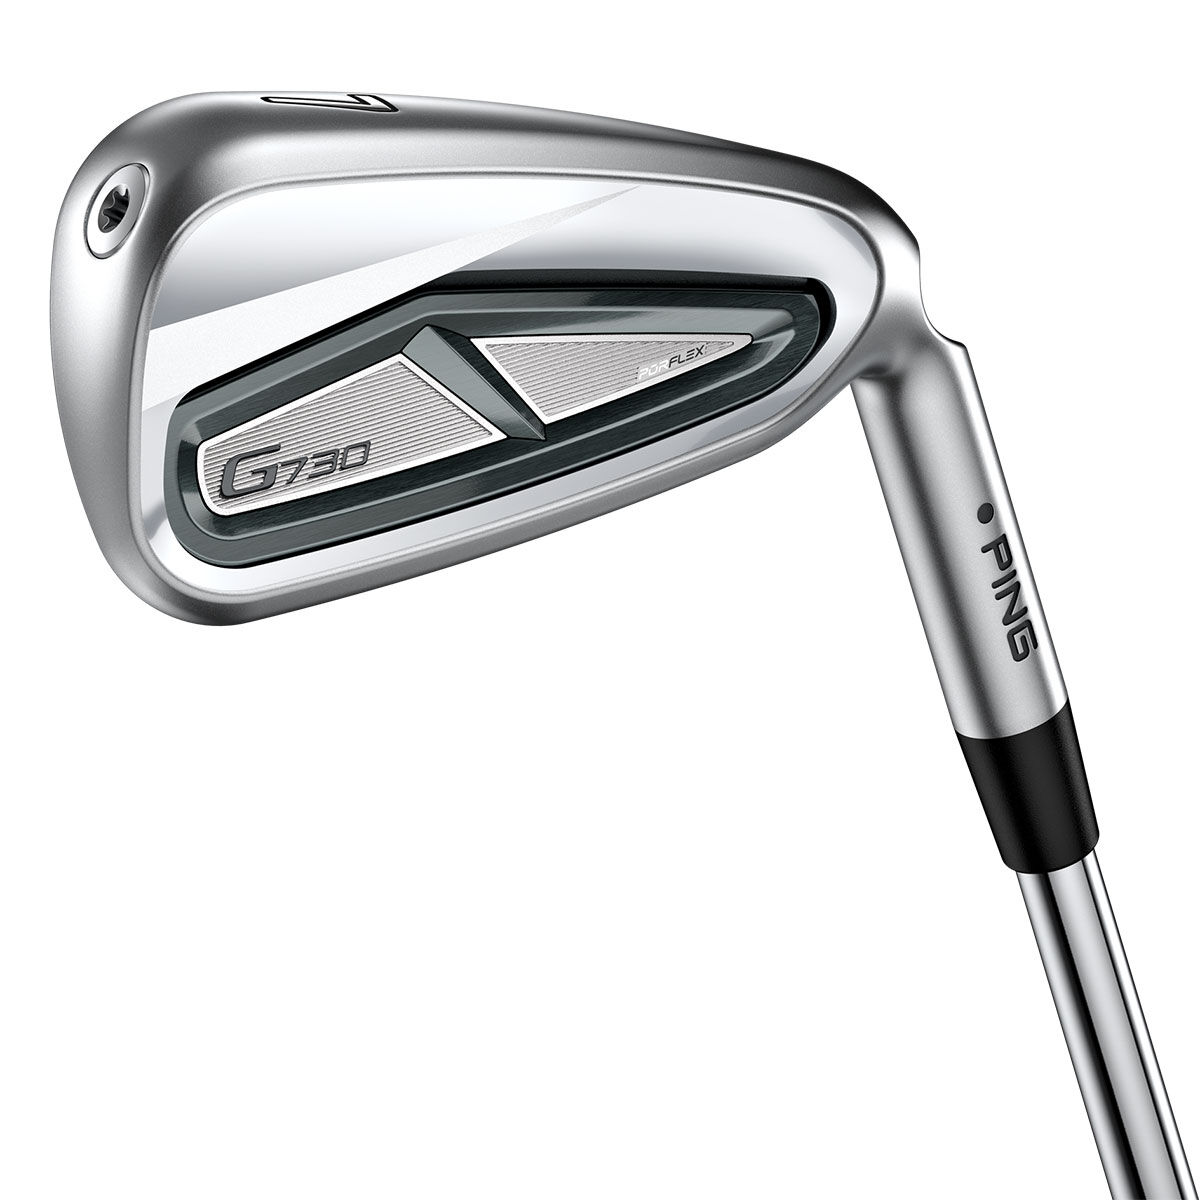 PING G730 Graphite Golf Irons - Custom Fit, Male, One Size | American Golf von Ping